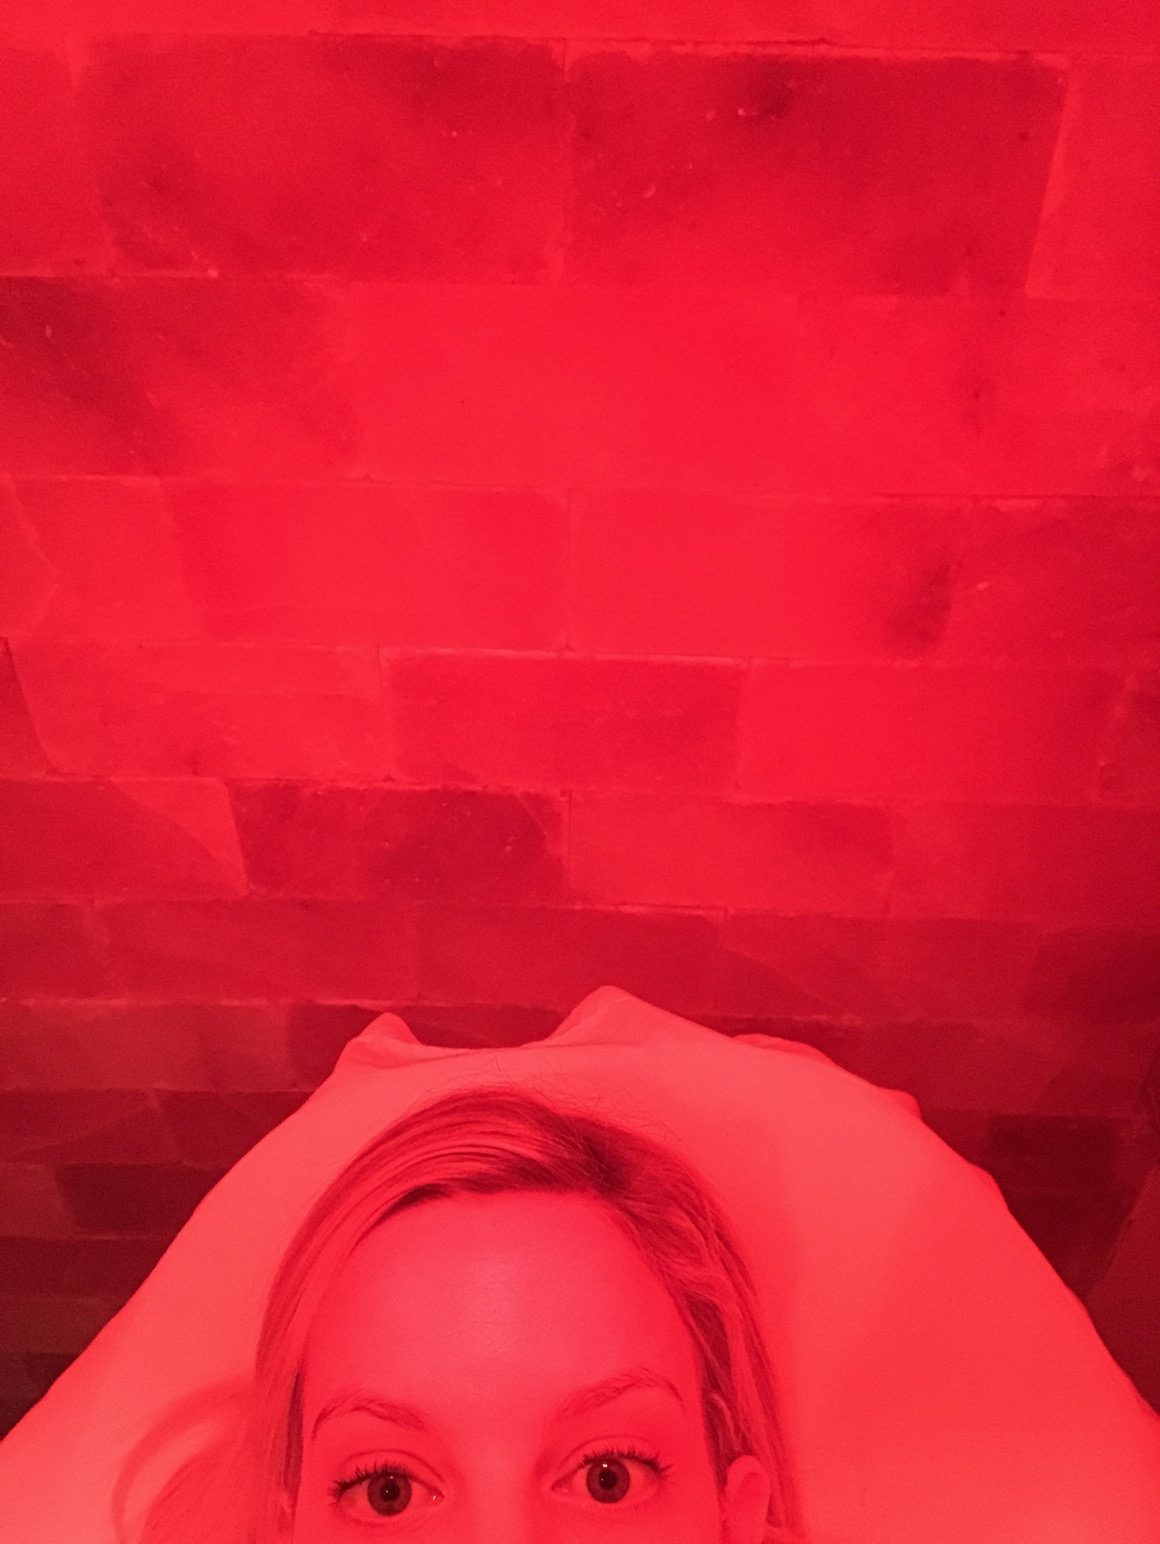 I visited a pink Himalayan sea salt cave, and here’s what happened ...